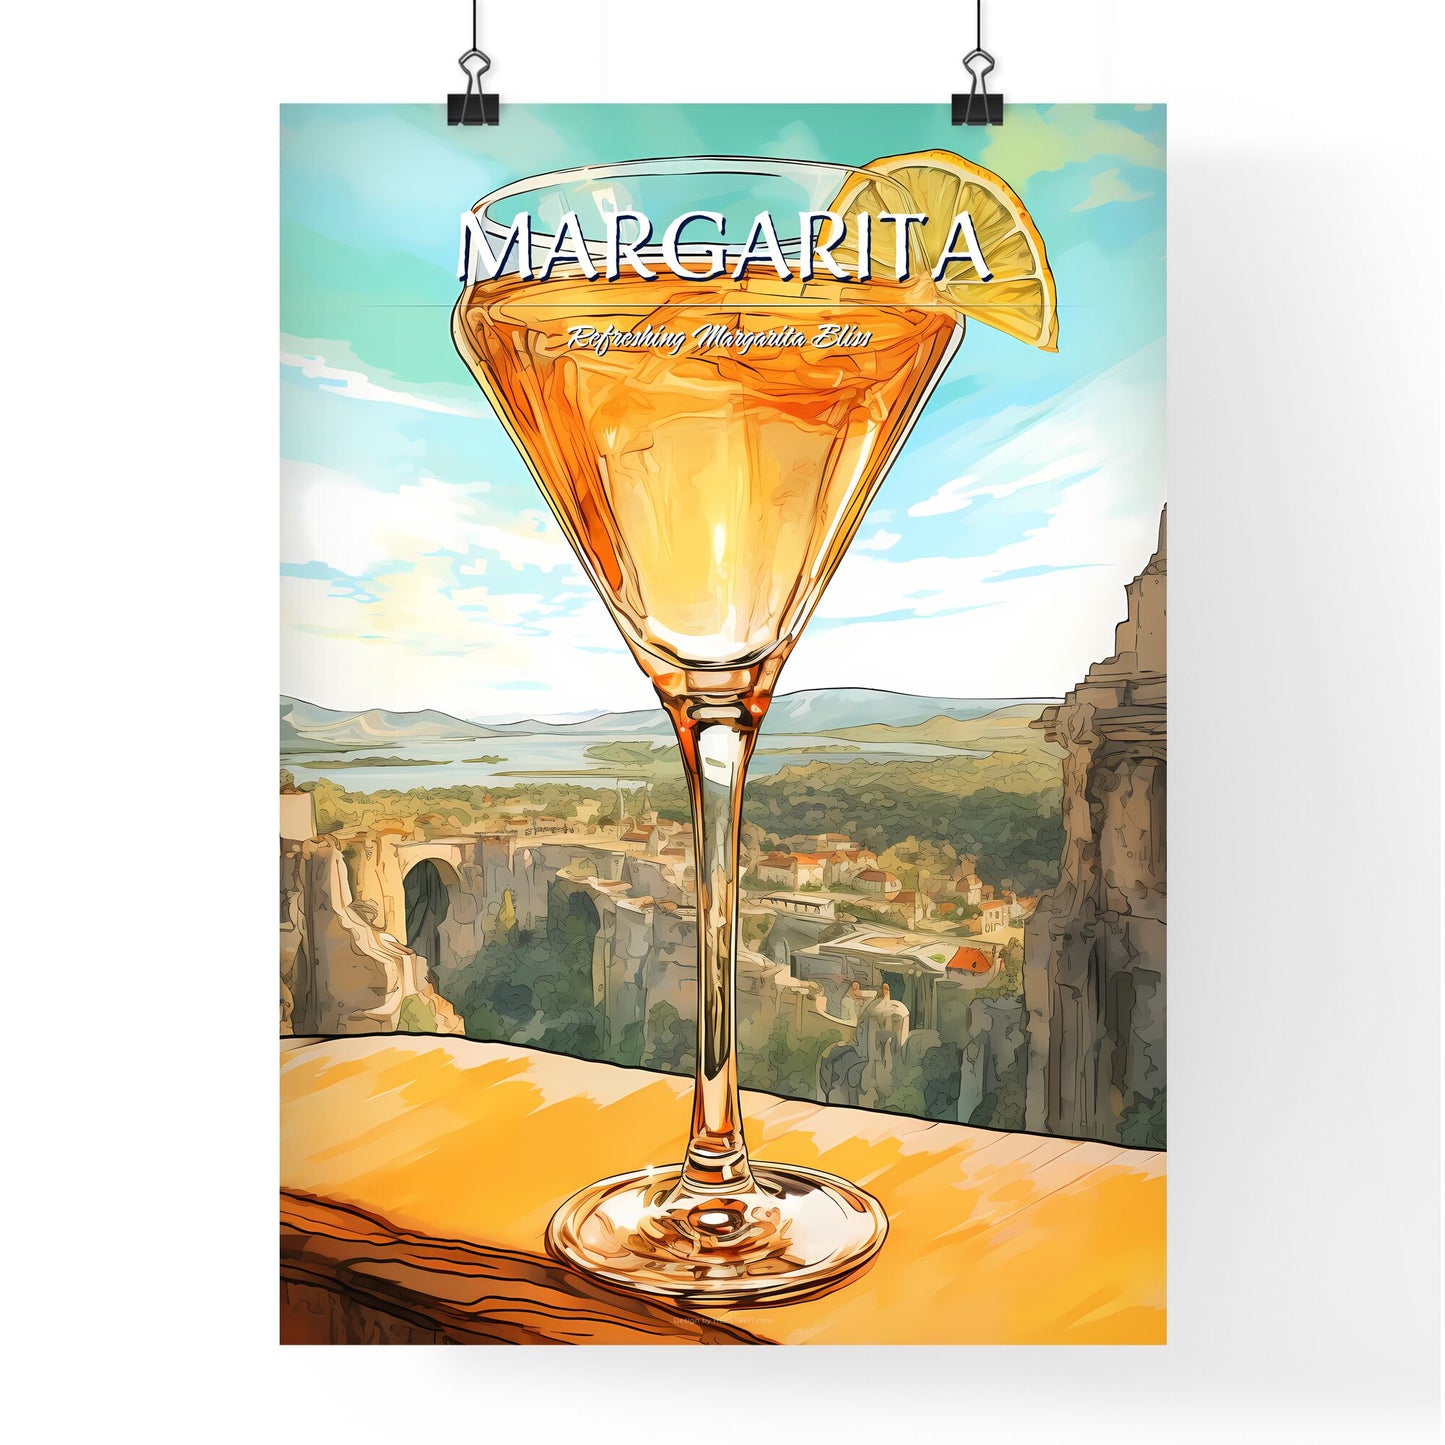 A Poster of Margarita Glass with classic margarita cocktail - A Glass Of Liquid With A Slice Of Lime And A City In The Background Default Title